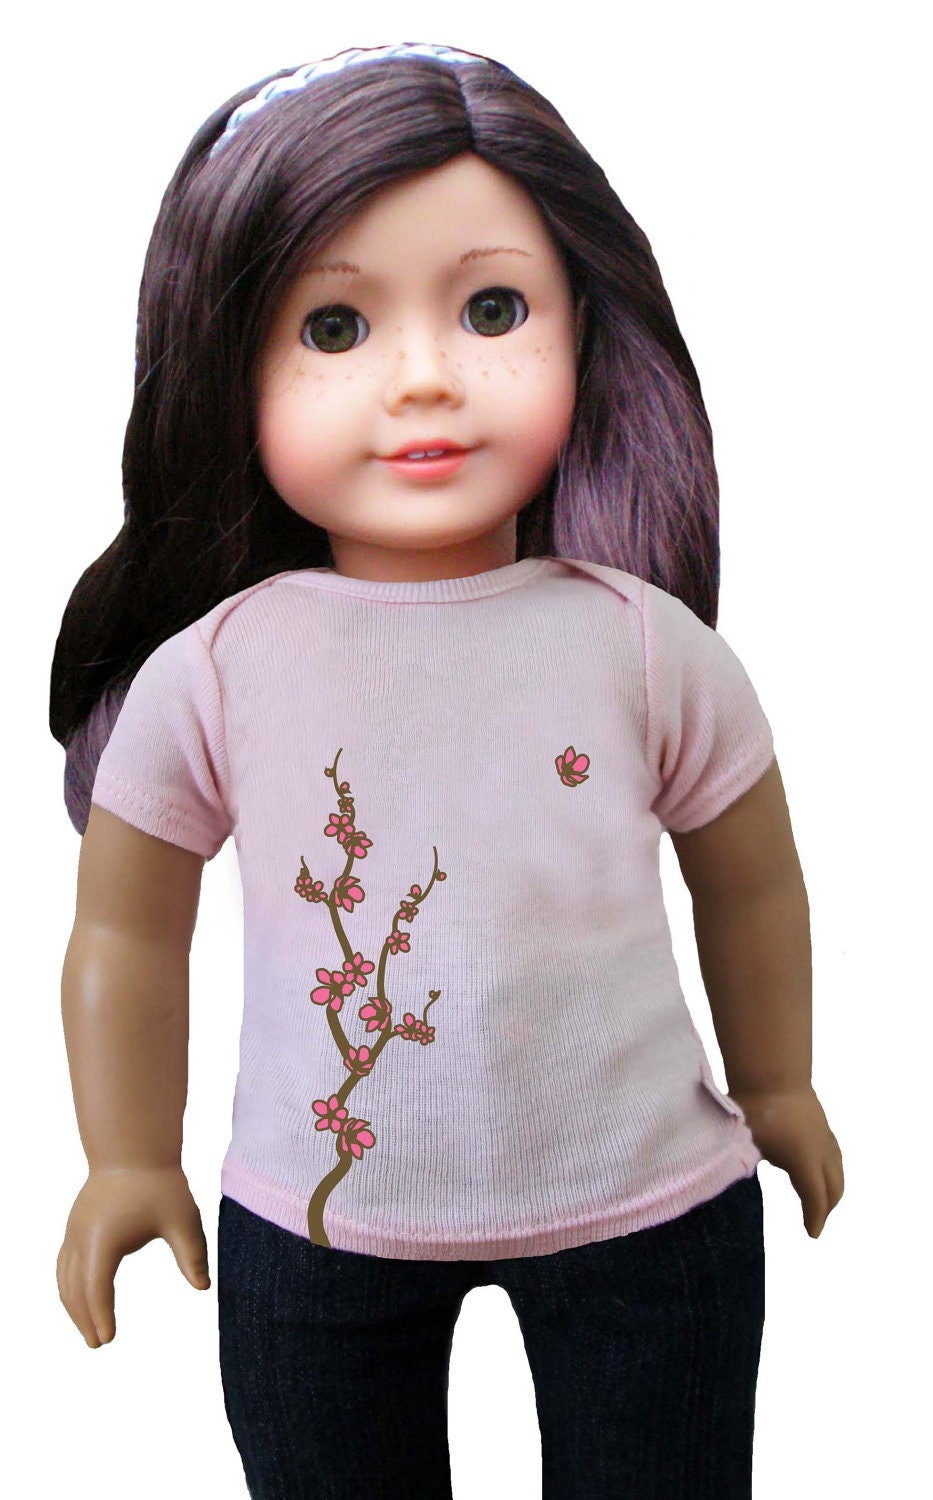 matching cherry blossom T-shirt for 18" doll